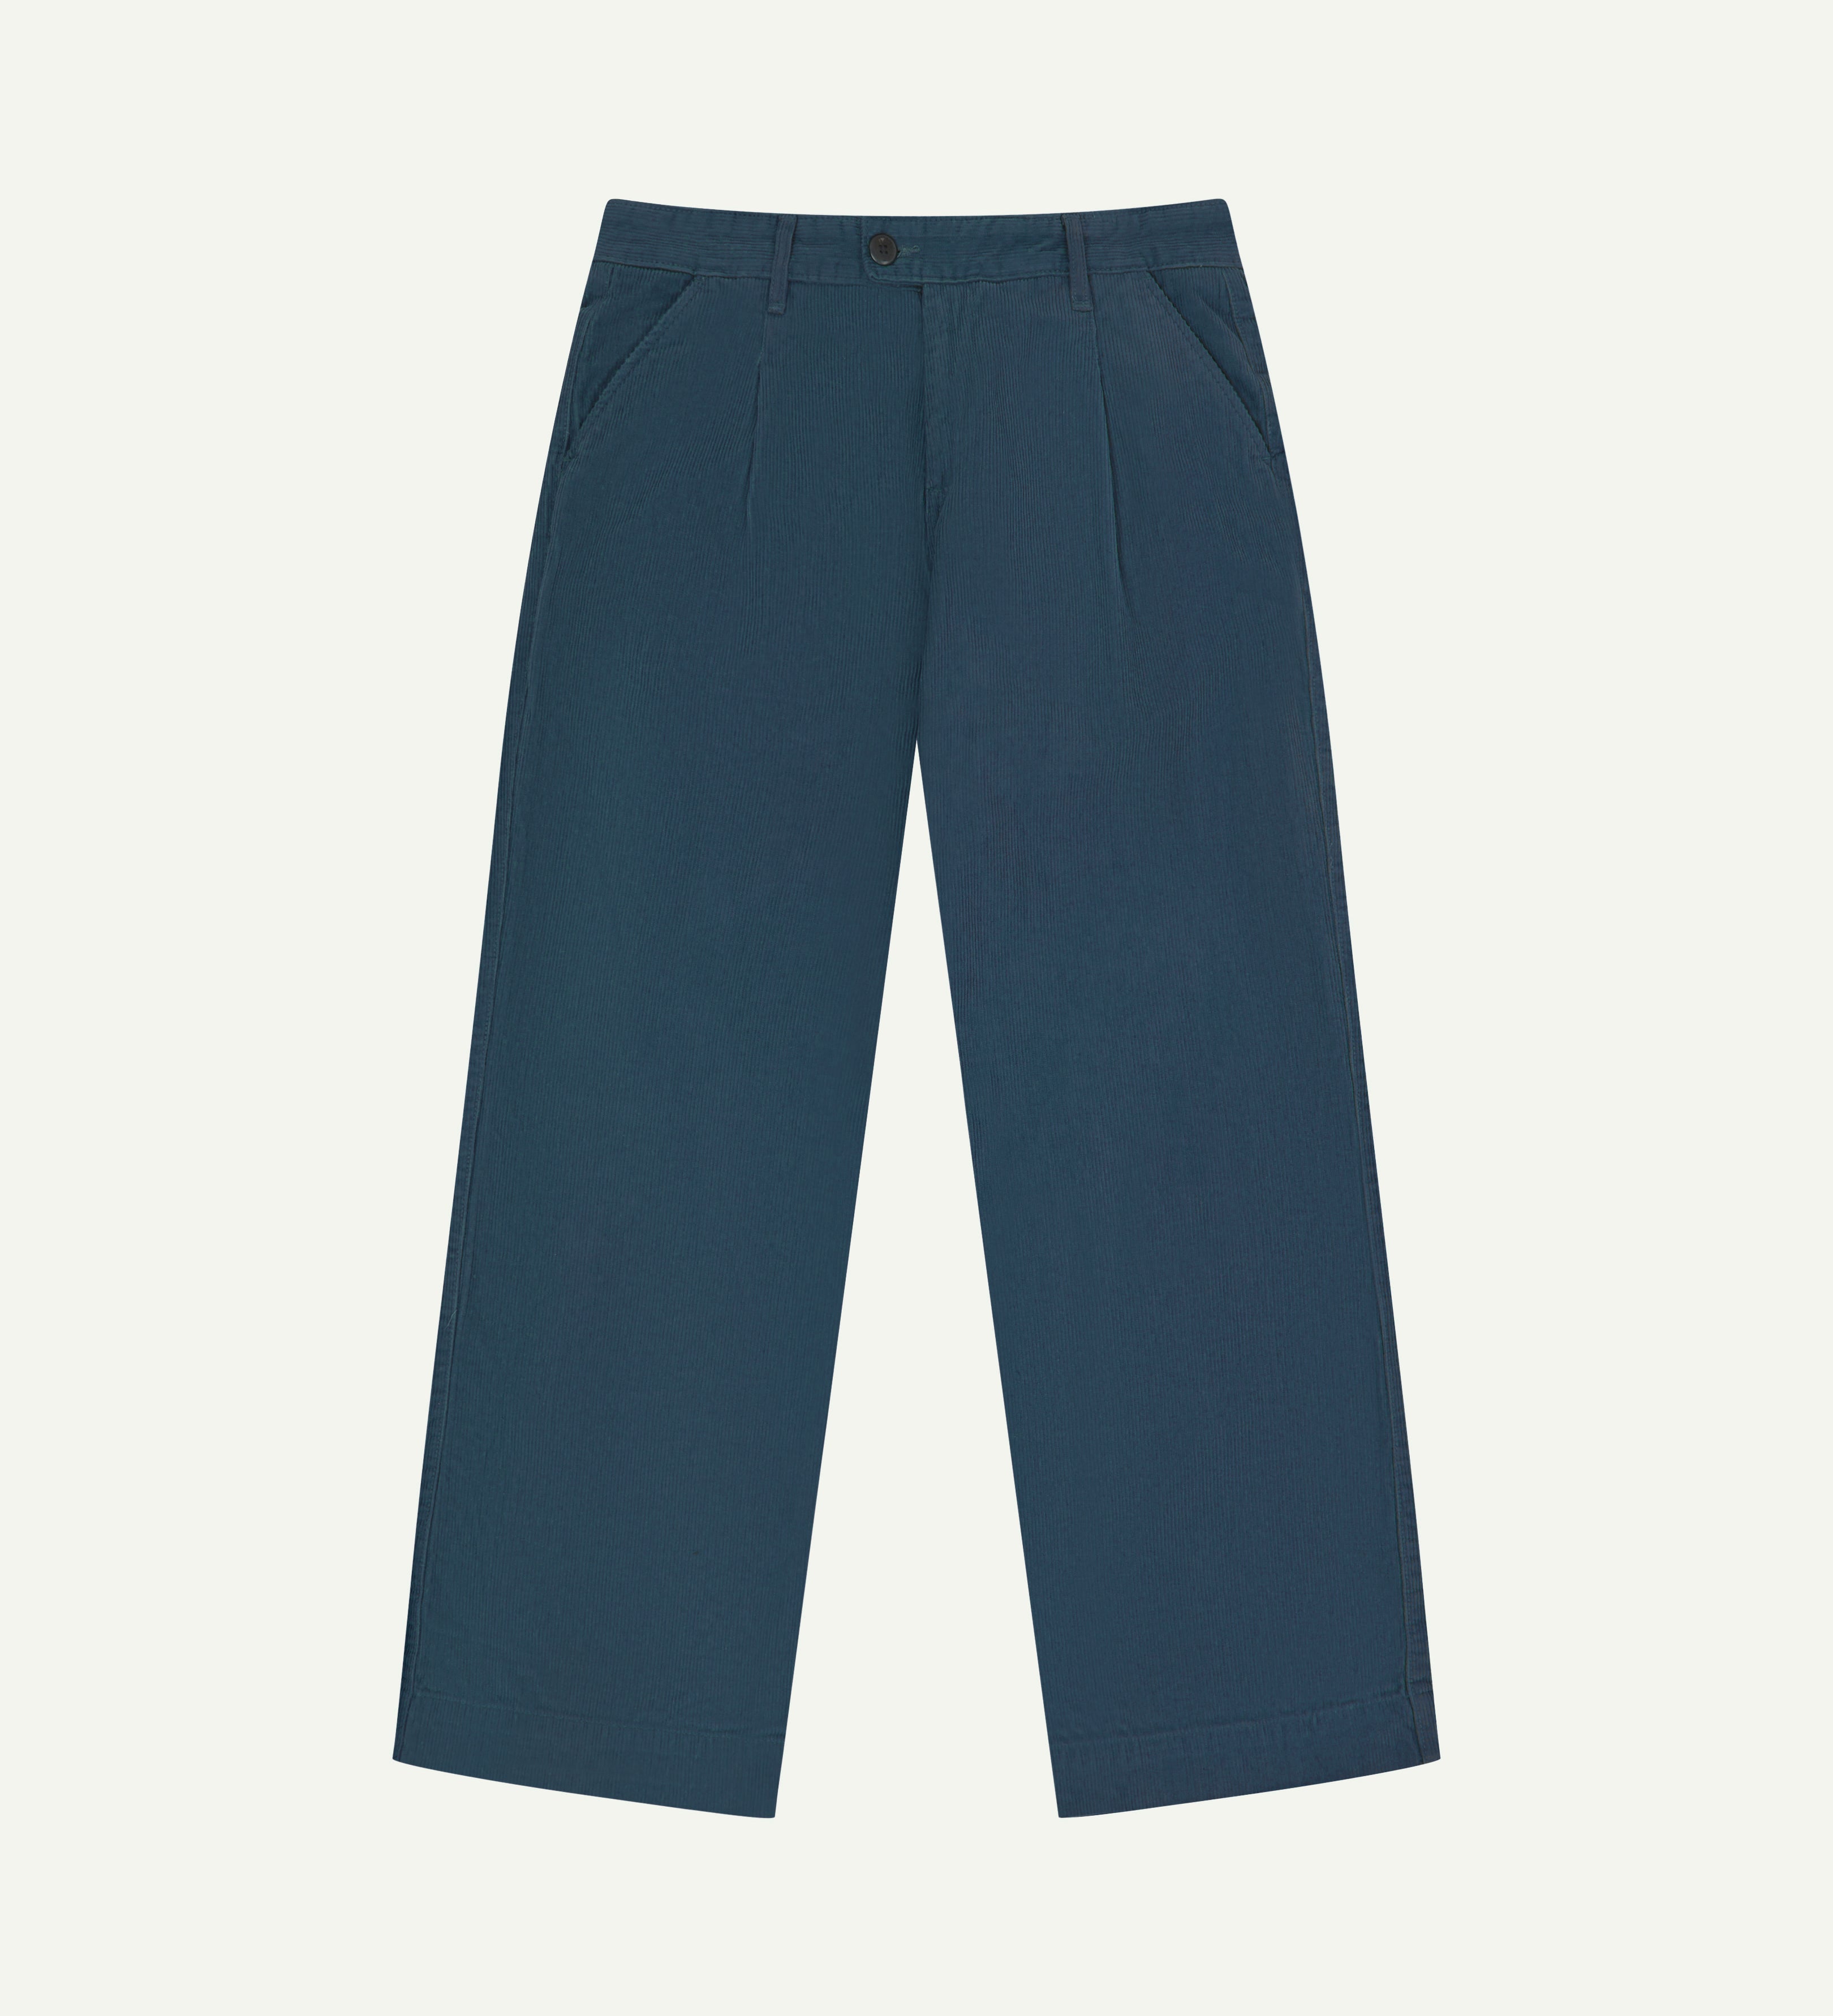 Front flat shot of Uskees cord boat pants in petrol blue.  Showing Corozo button fasteningand wide leg fit.